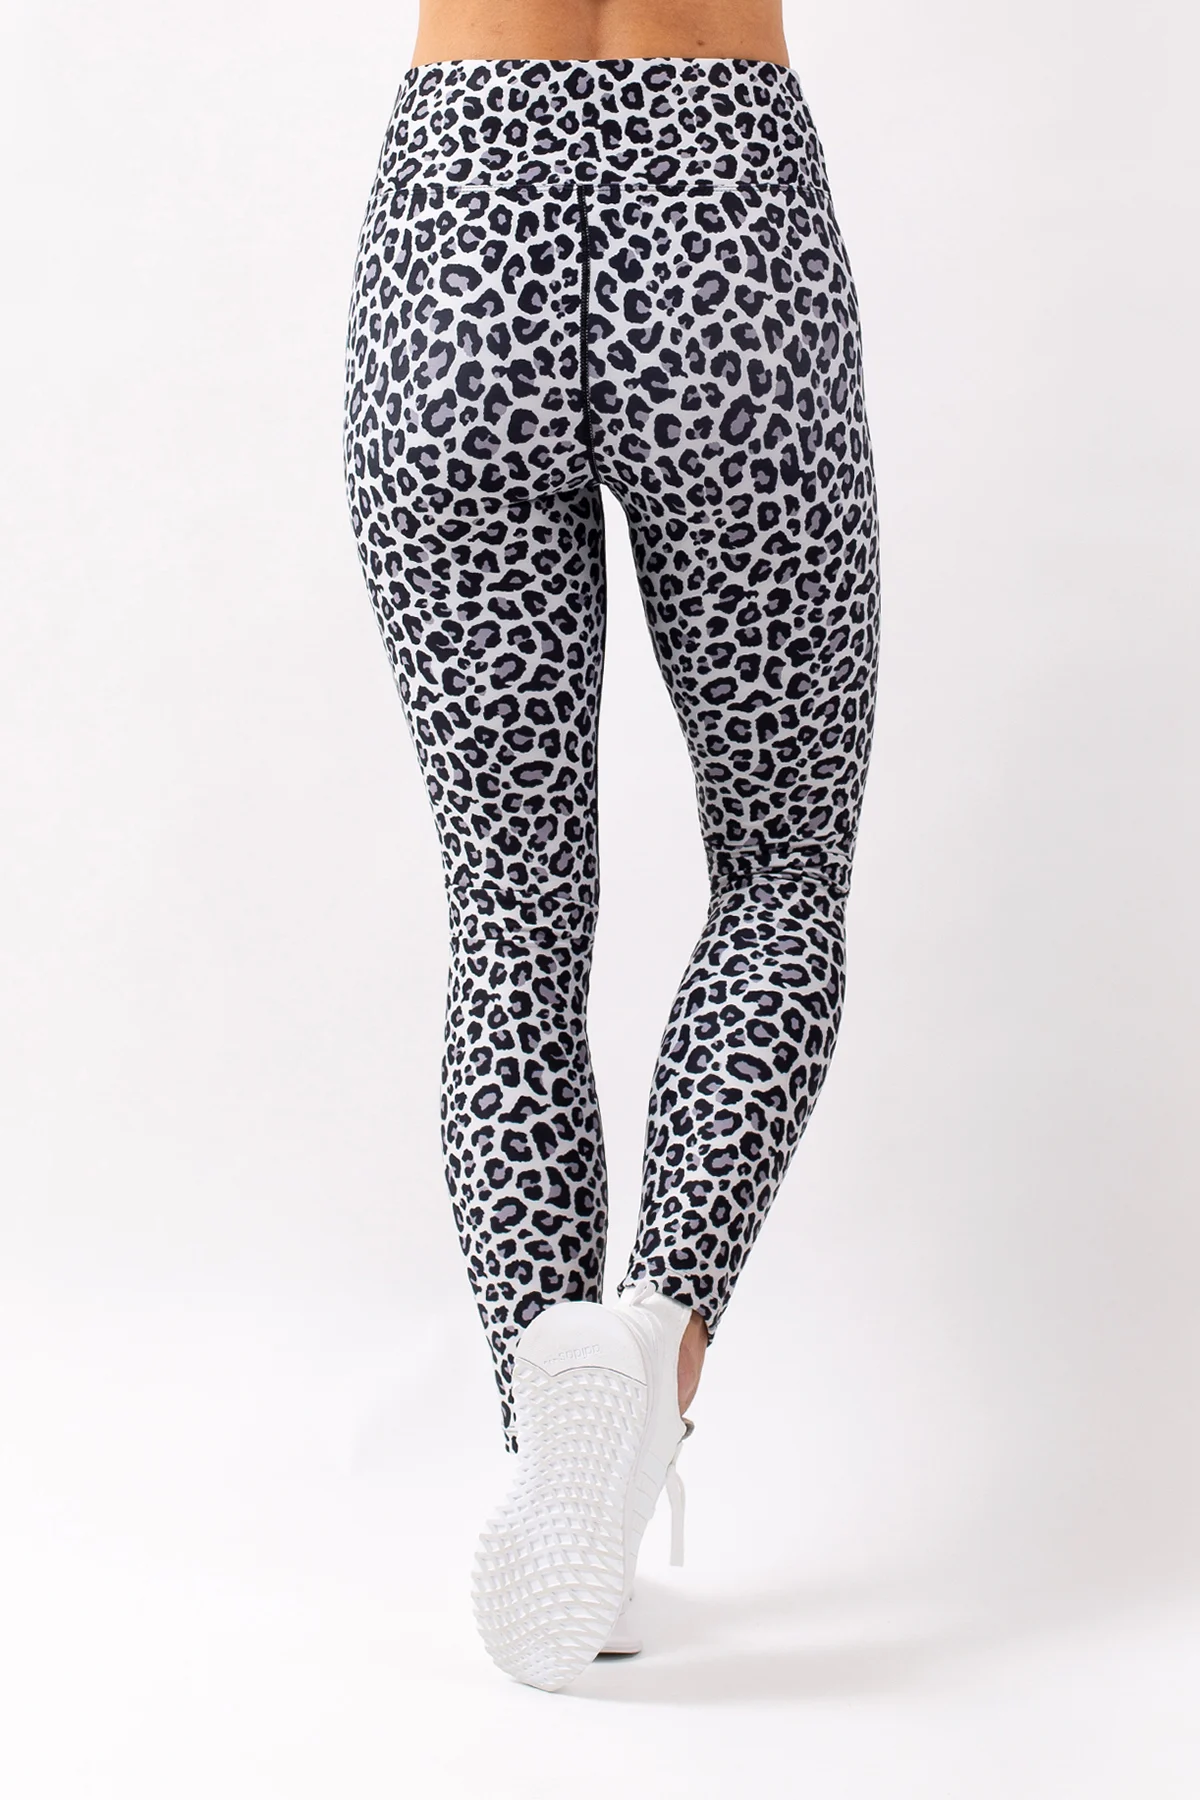 Eivy Icecold Tights snow leopard